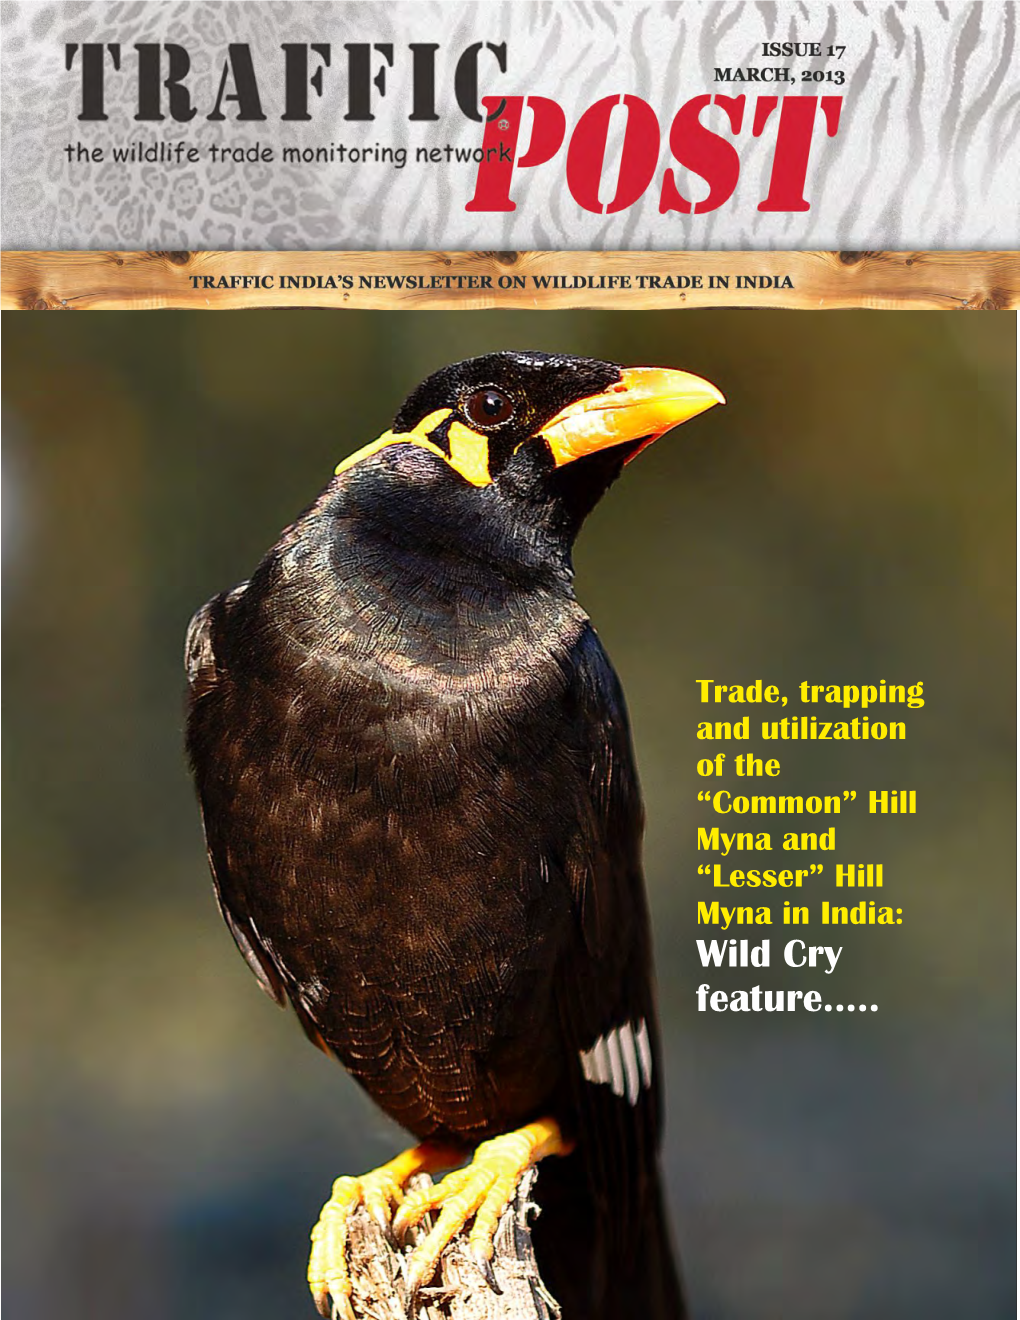 Hill Myna and “Lesser” Hill Myna in India: Wild Cry Feature